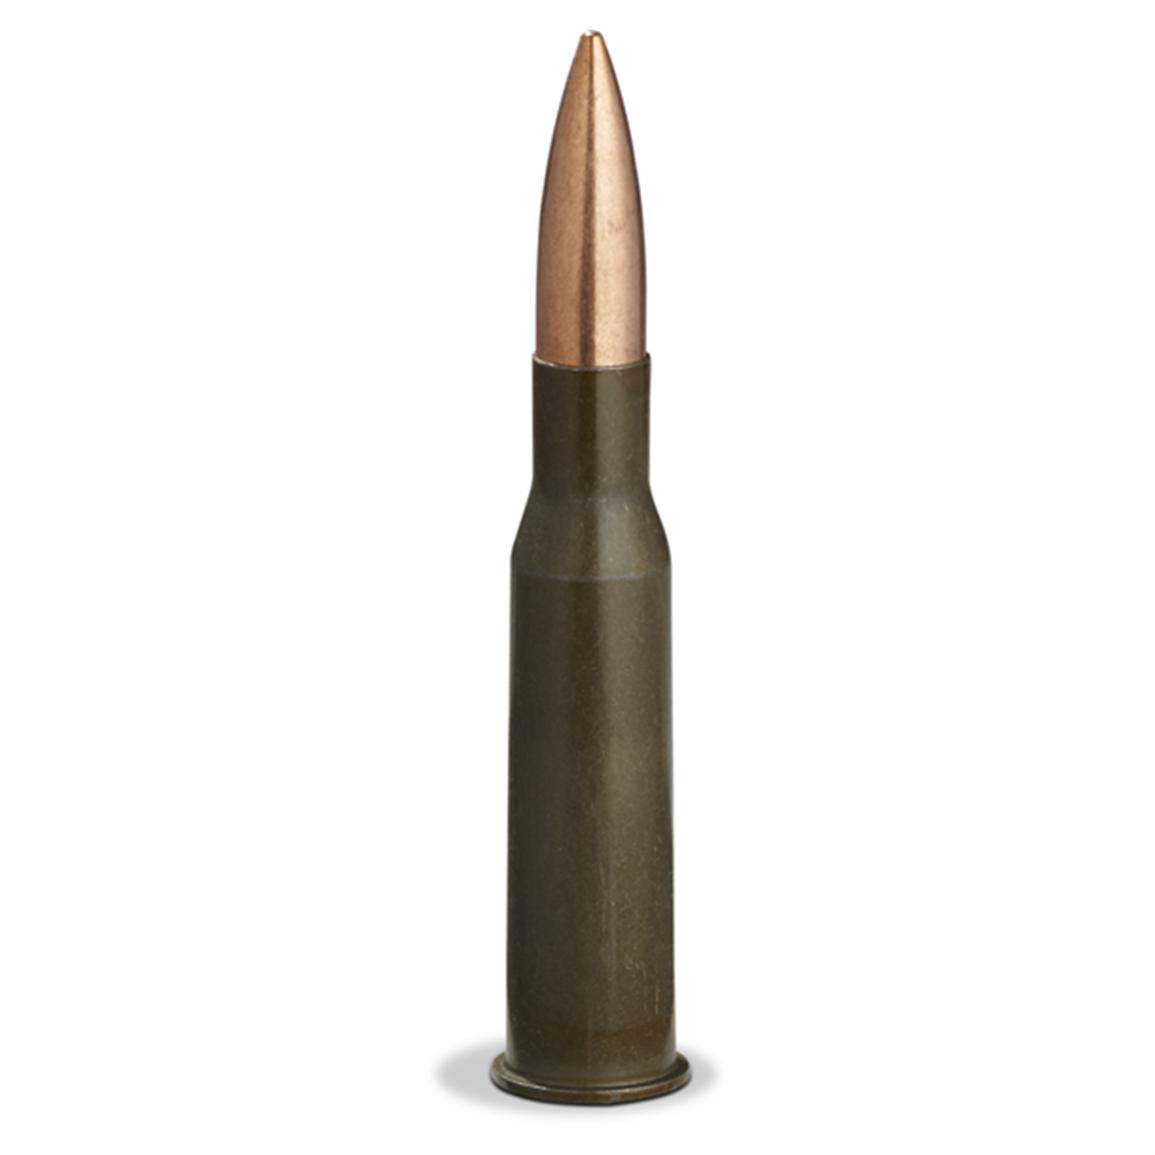 Wolf WPA Military Classic, 7.62x54R, FMJ, 148 Grain, 20 Rounds - 666688 ...